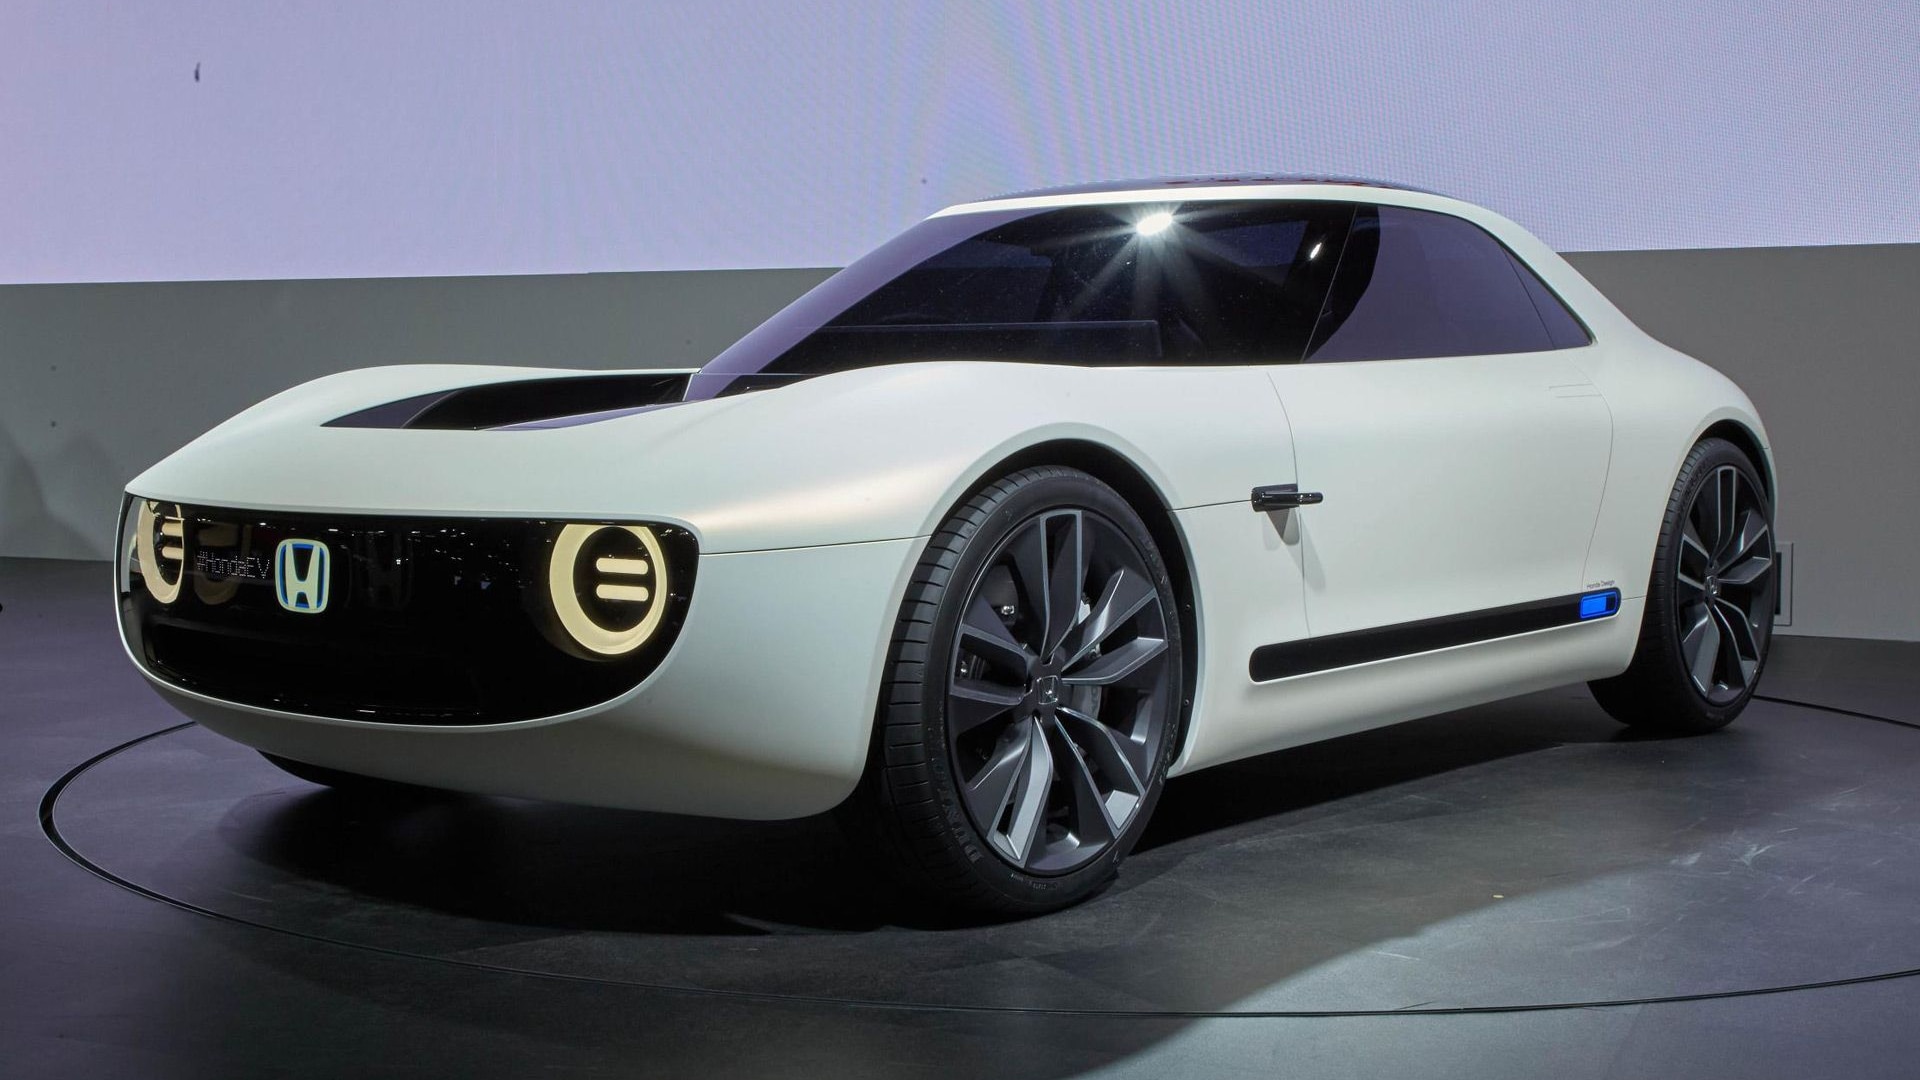 Honda's second electriccar concept is Sports EV coupe unveiled in Tokyo